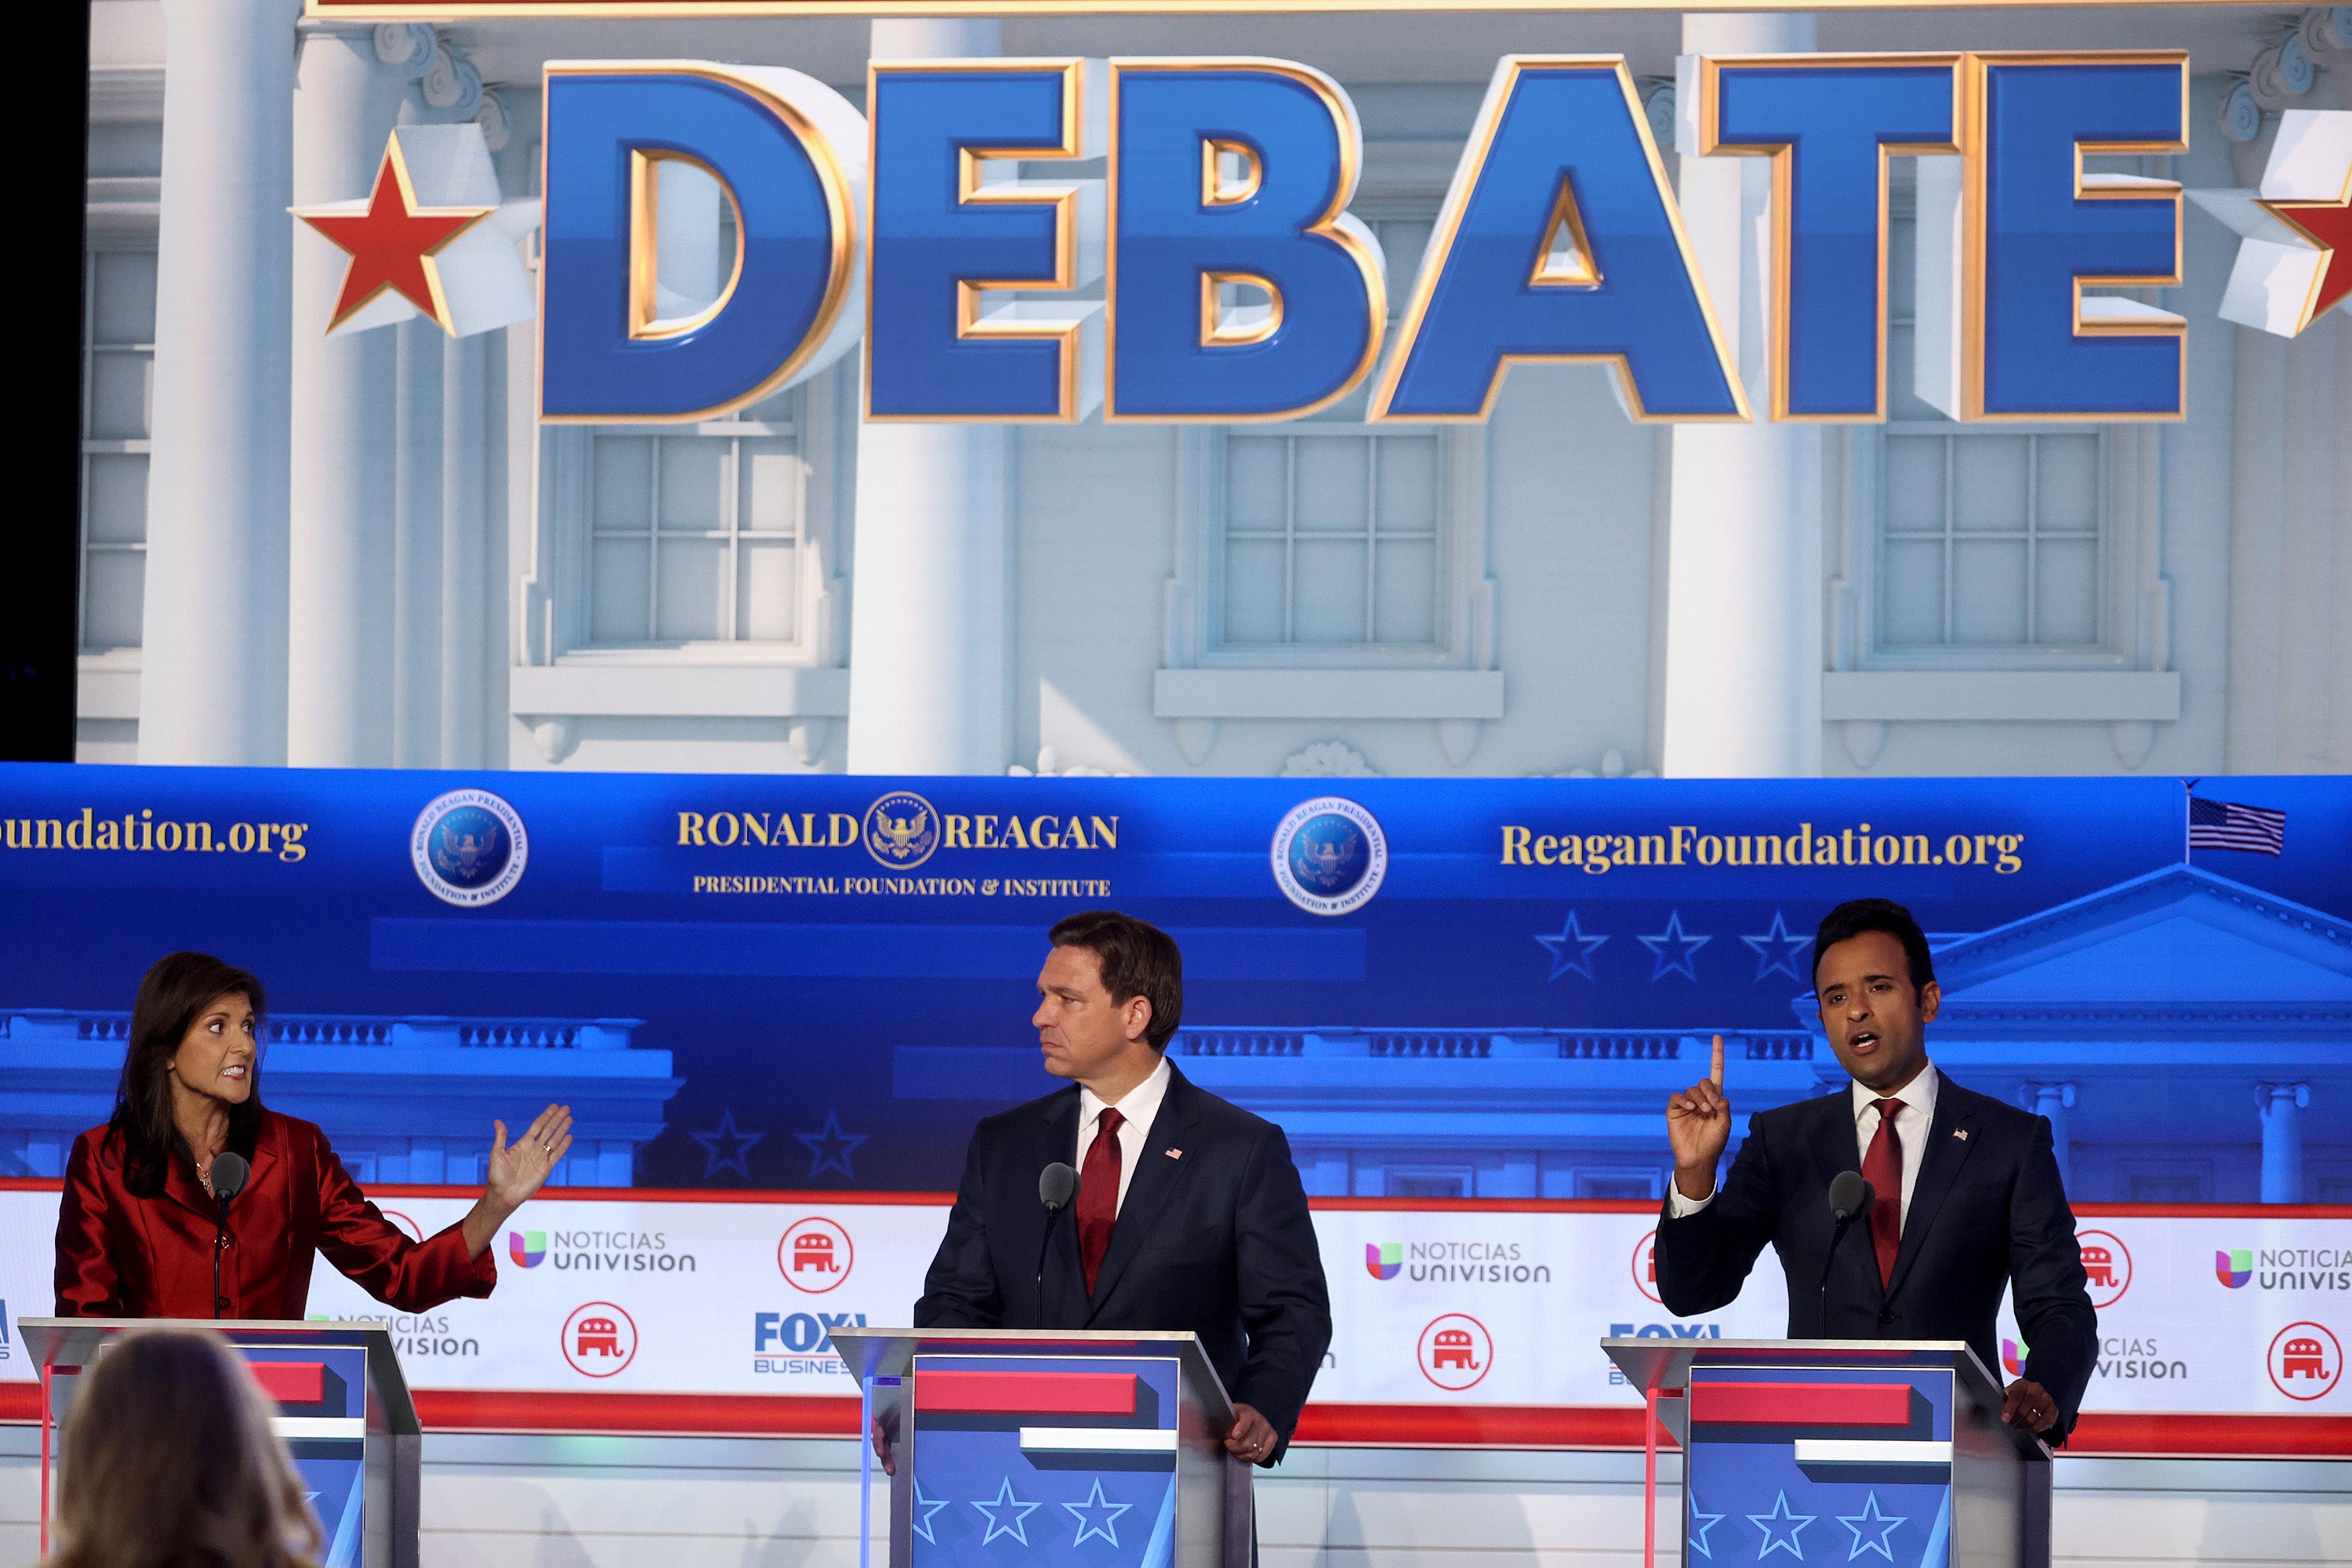 Nikki Haley sparred with Ron DeSantis and Vivek Ramaswamy on the debate stage